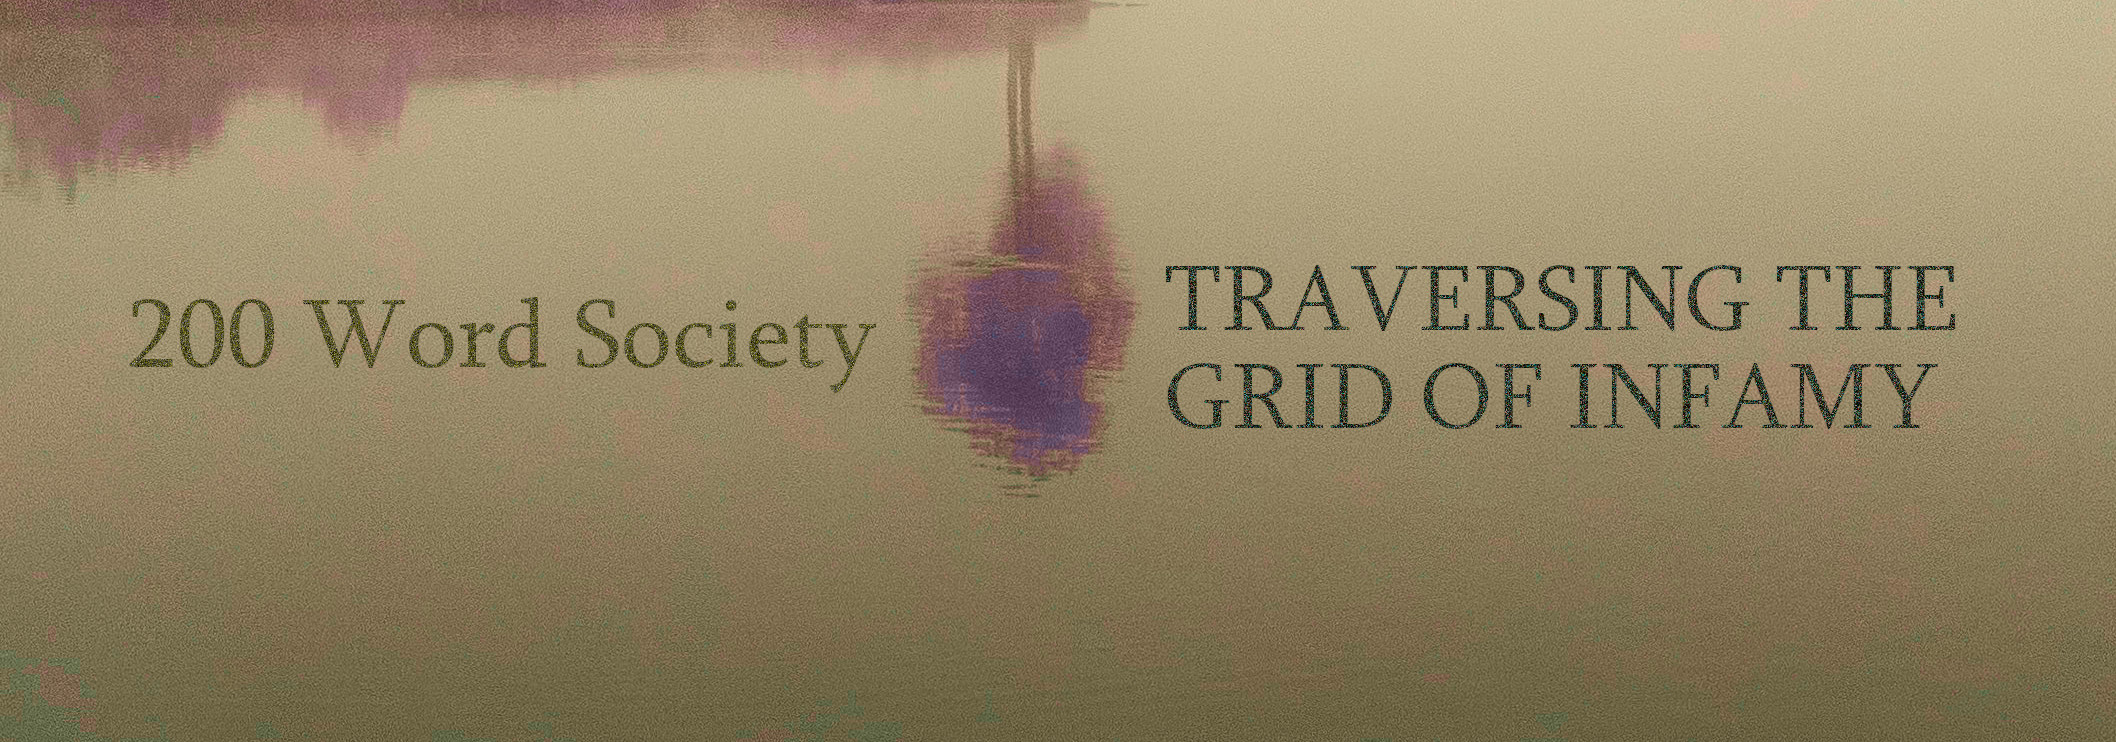 200 Word Society / Traversing the Grid of Infamy